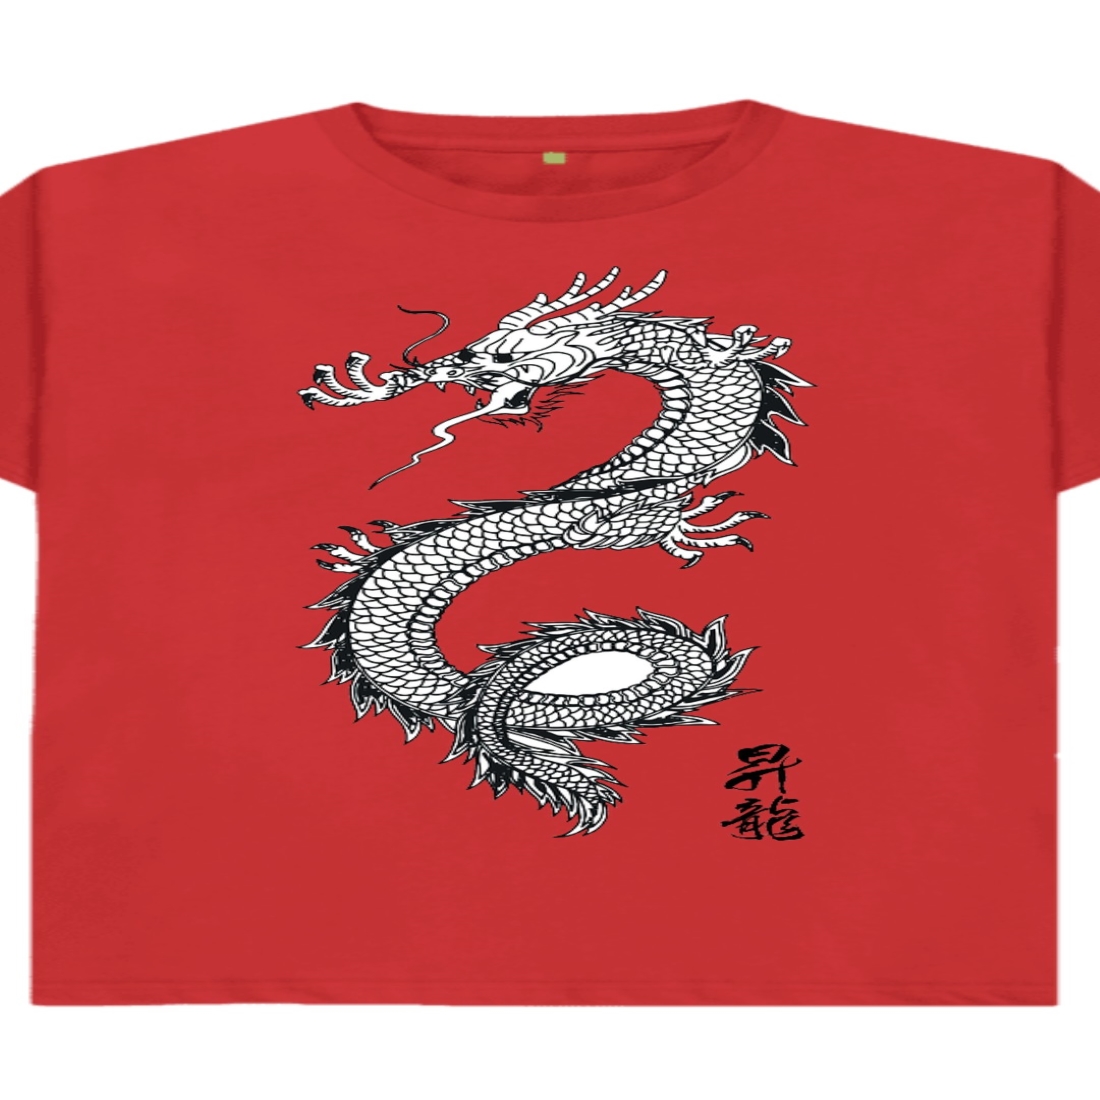 Best T-shirts Designs Under $10 preview image.